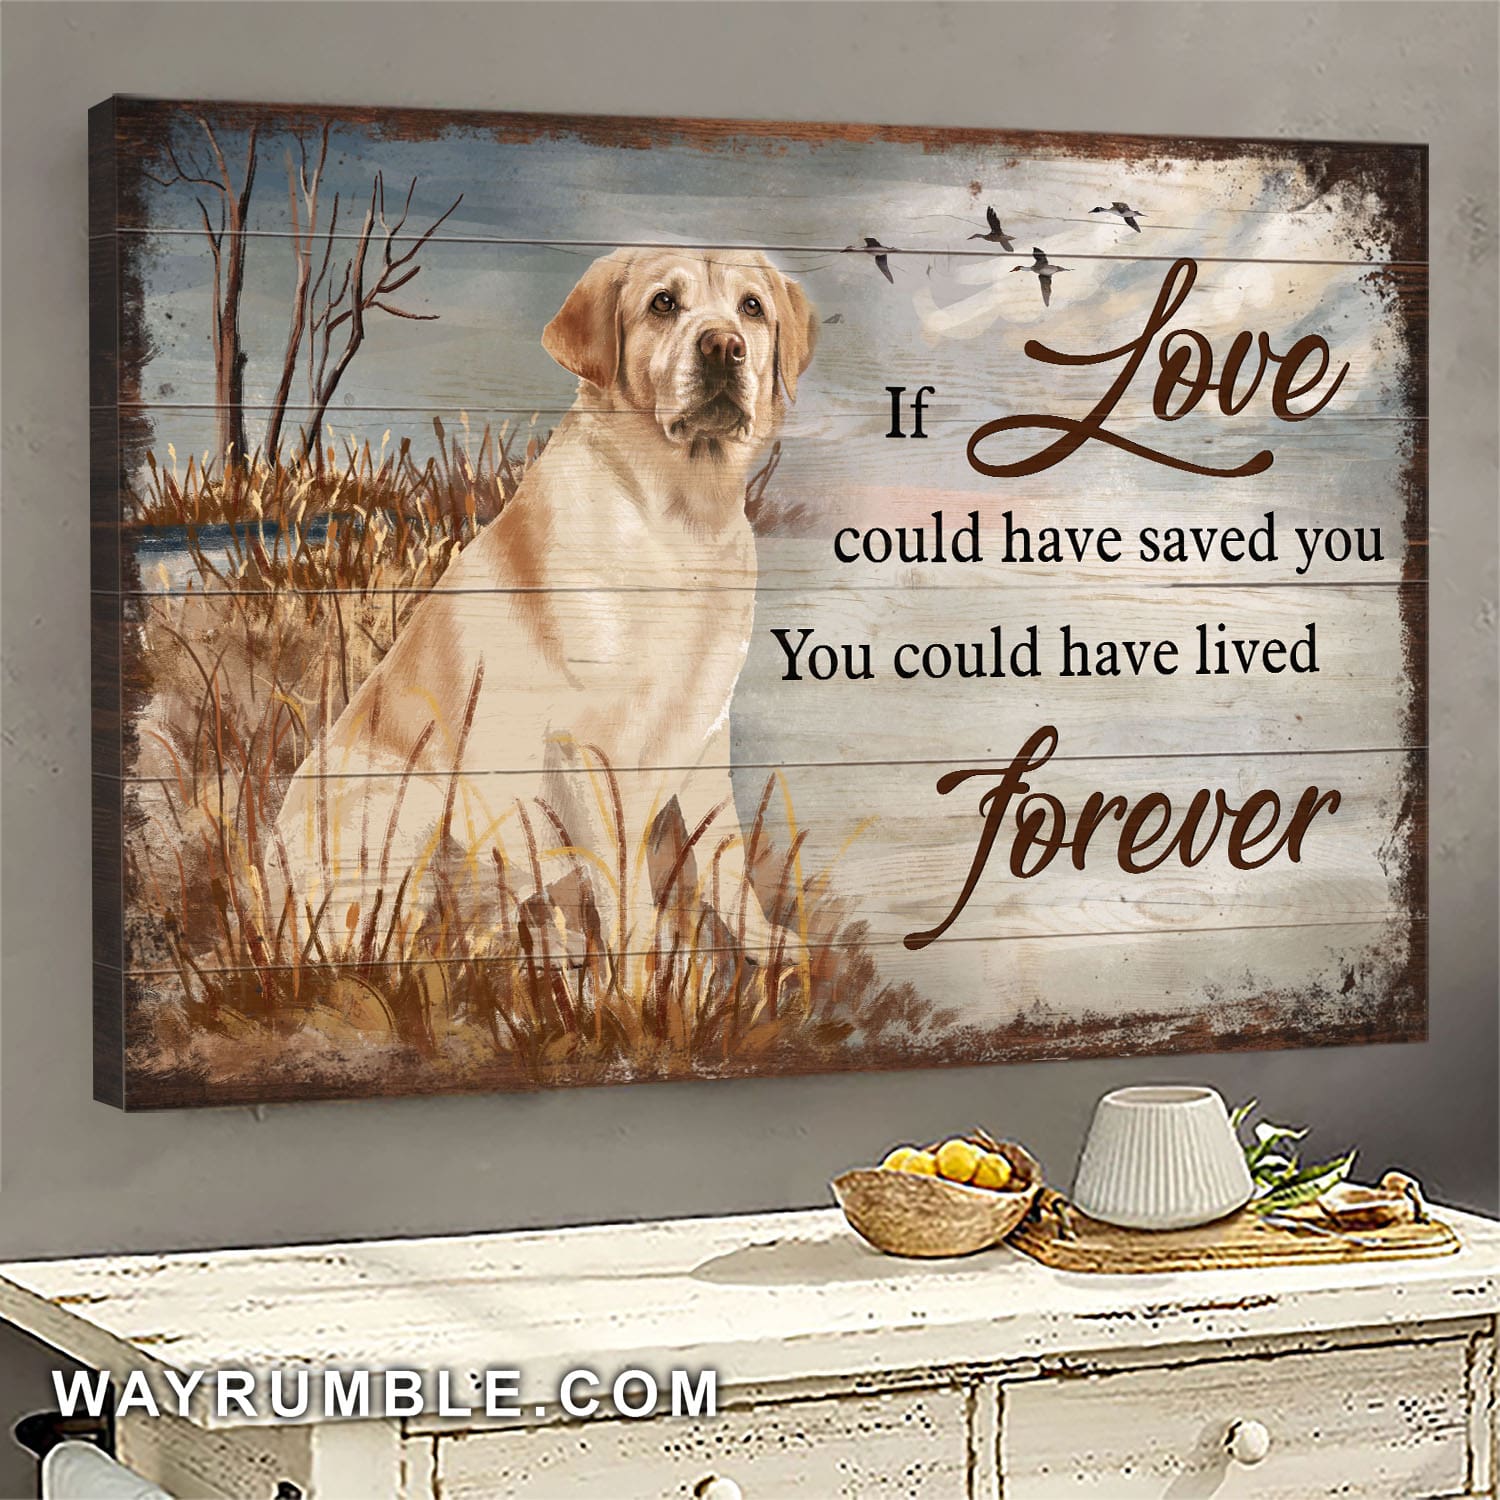 Labrador, Reeds, By the riverside, If love could have saved you - Dog Landscape Canvas Prints, Wall Art